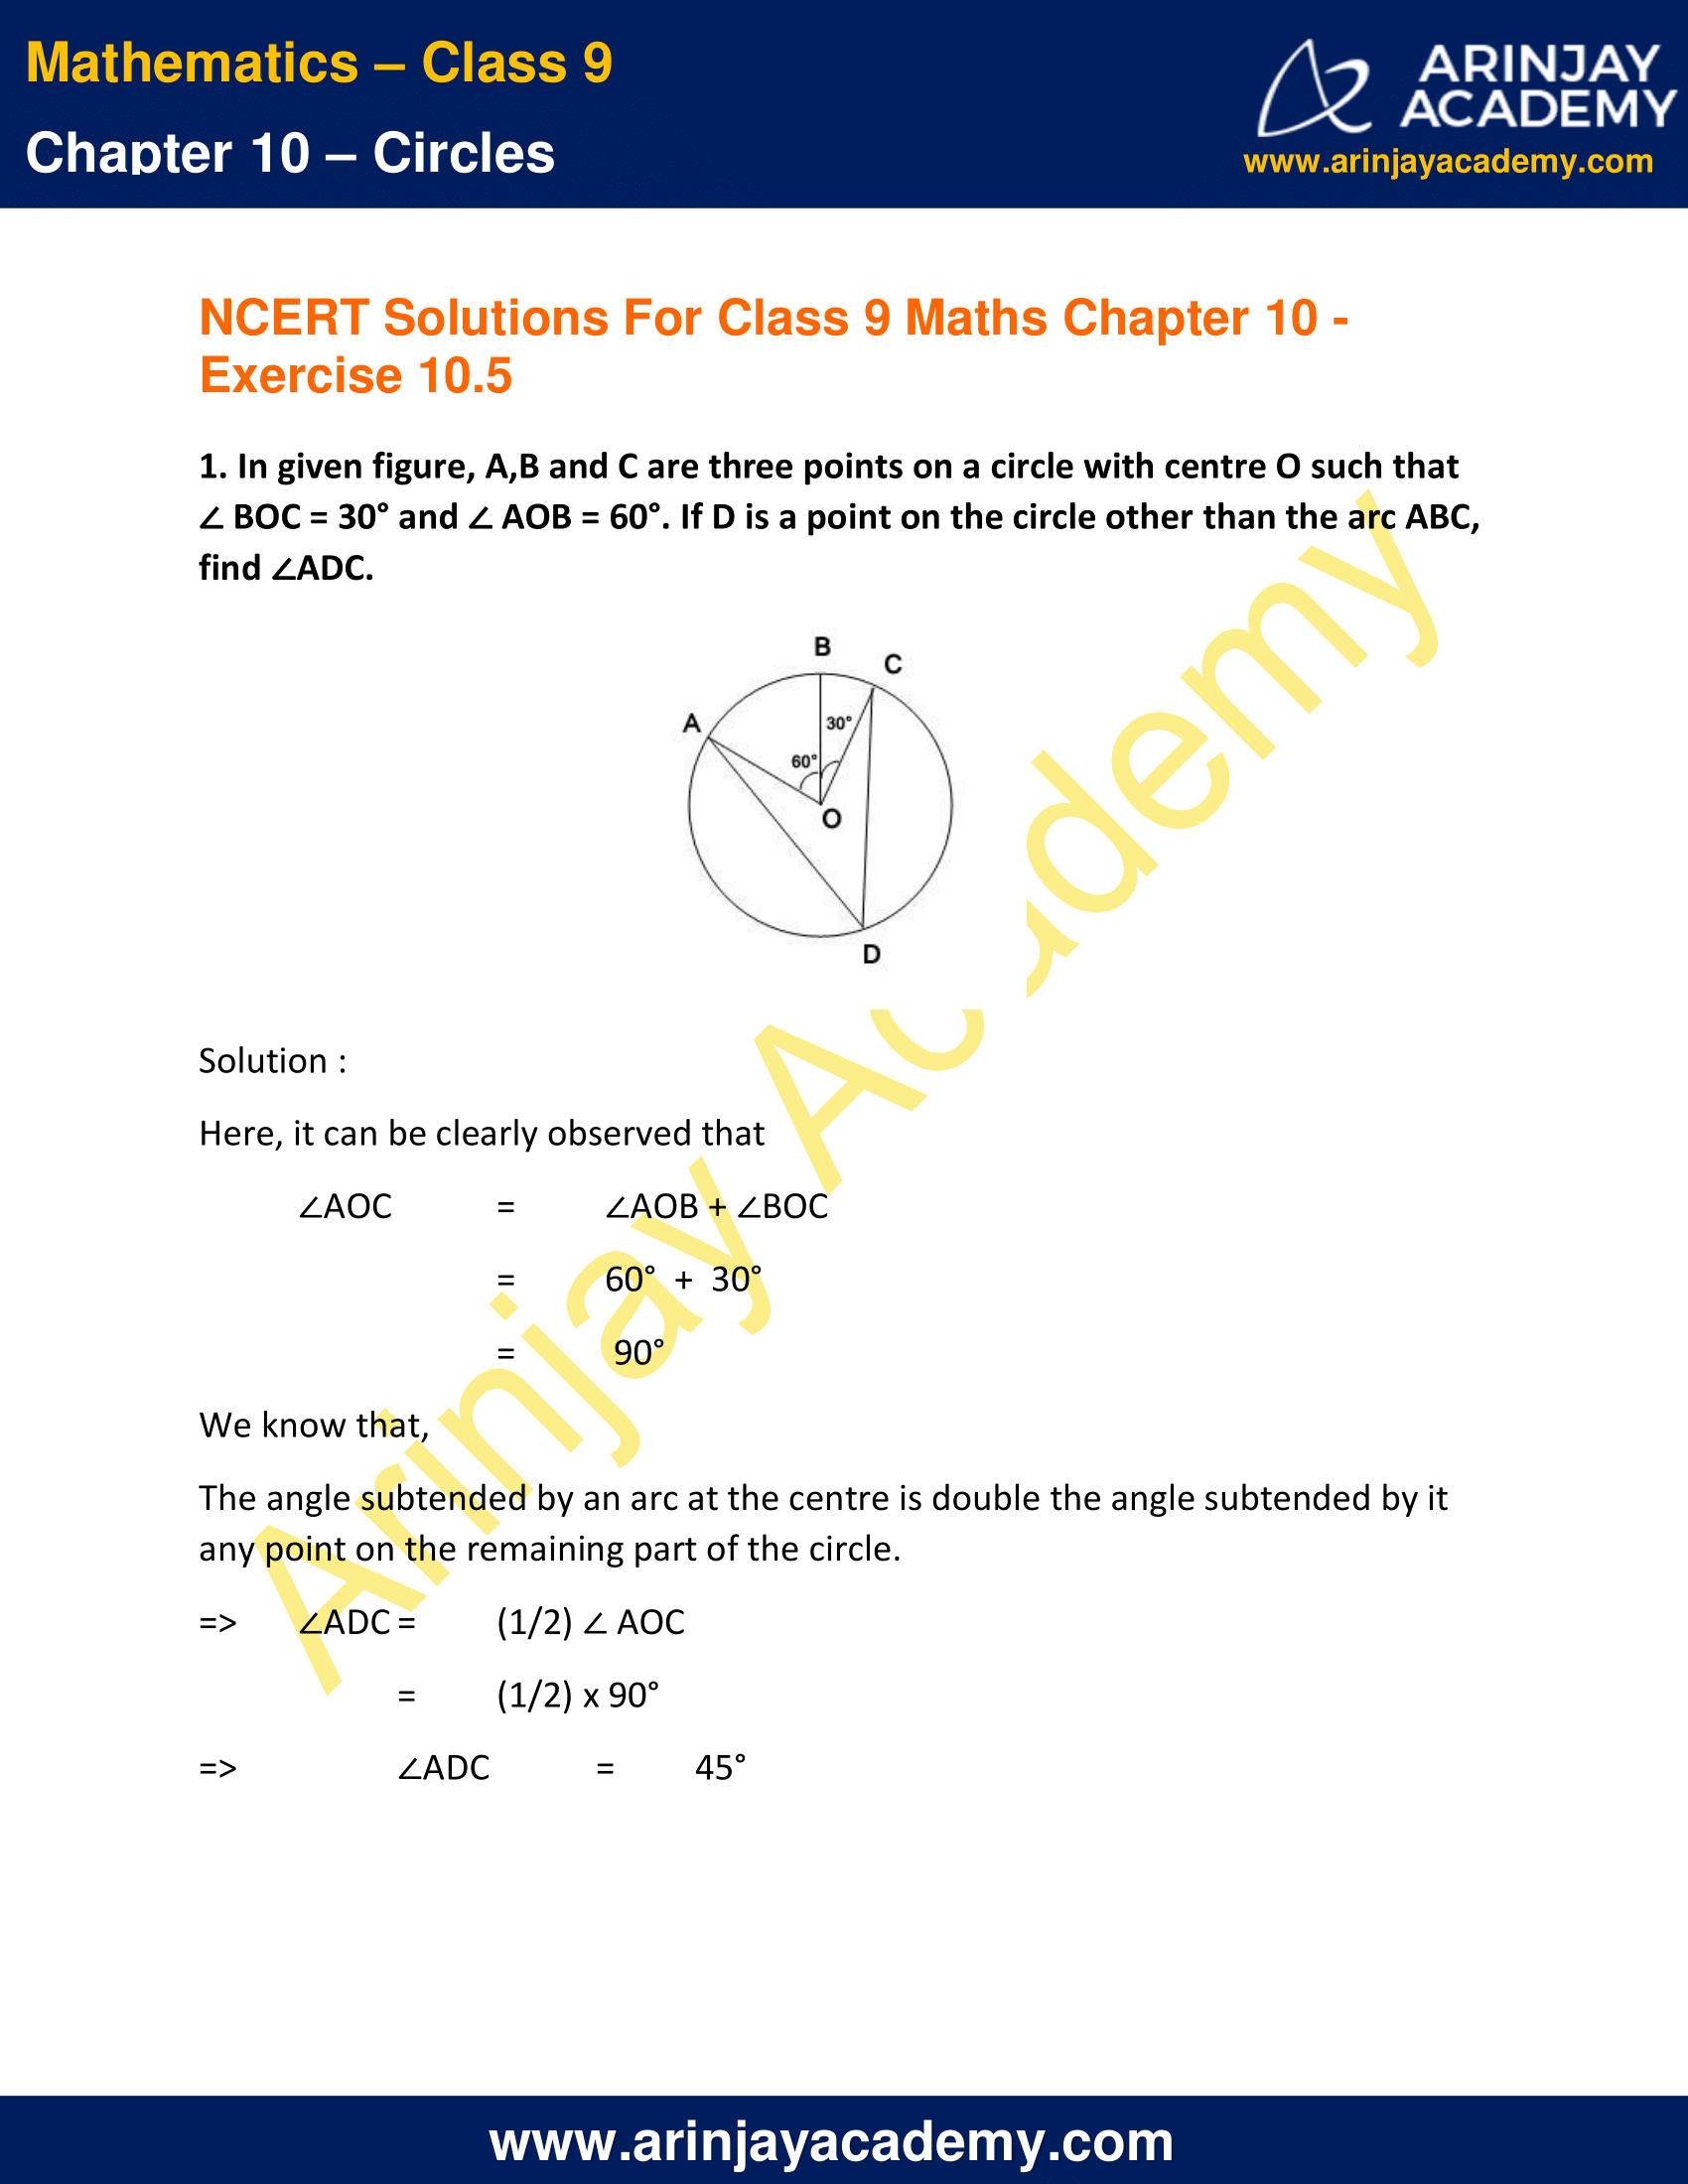 NCERT Solutions for Class 9 Maths Chapter 10 Exercise 10.5 image 1